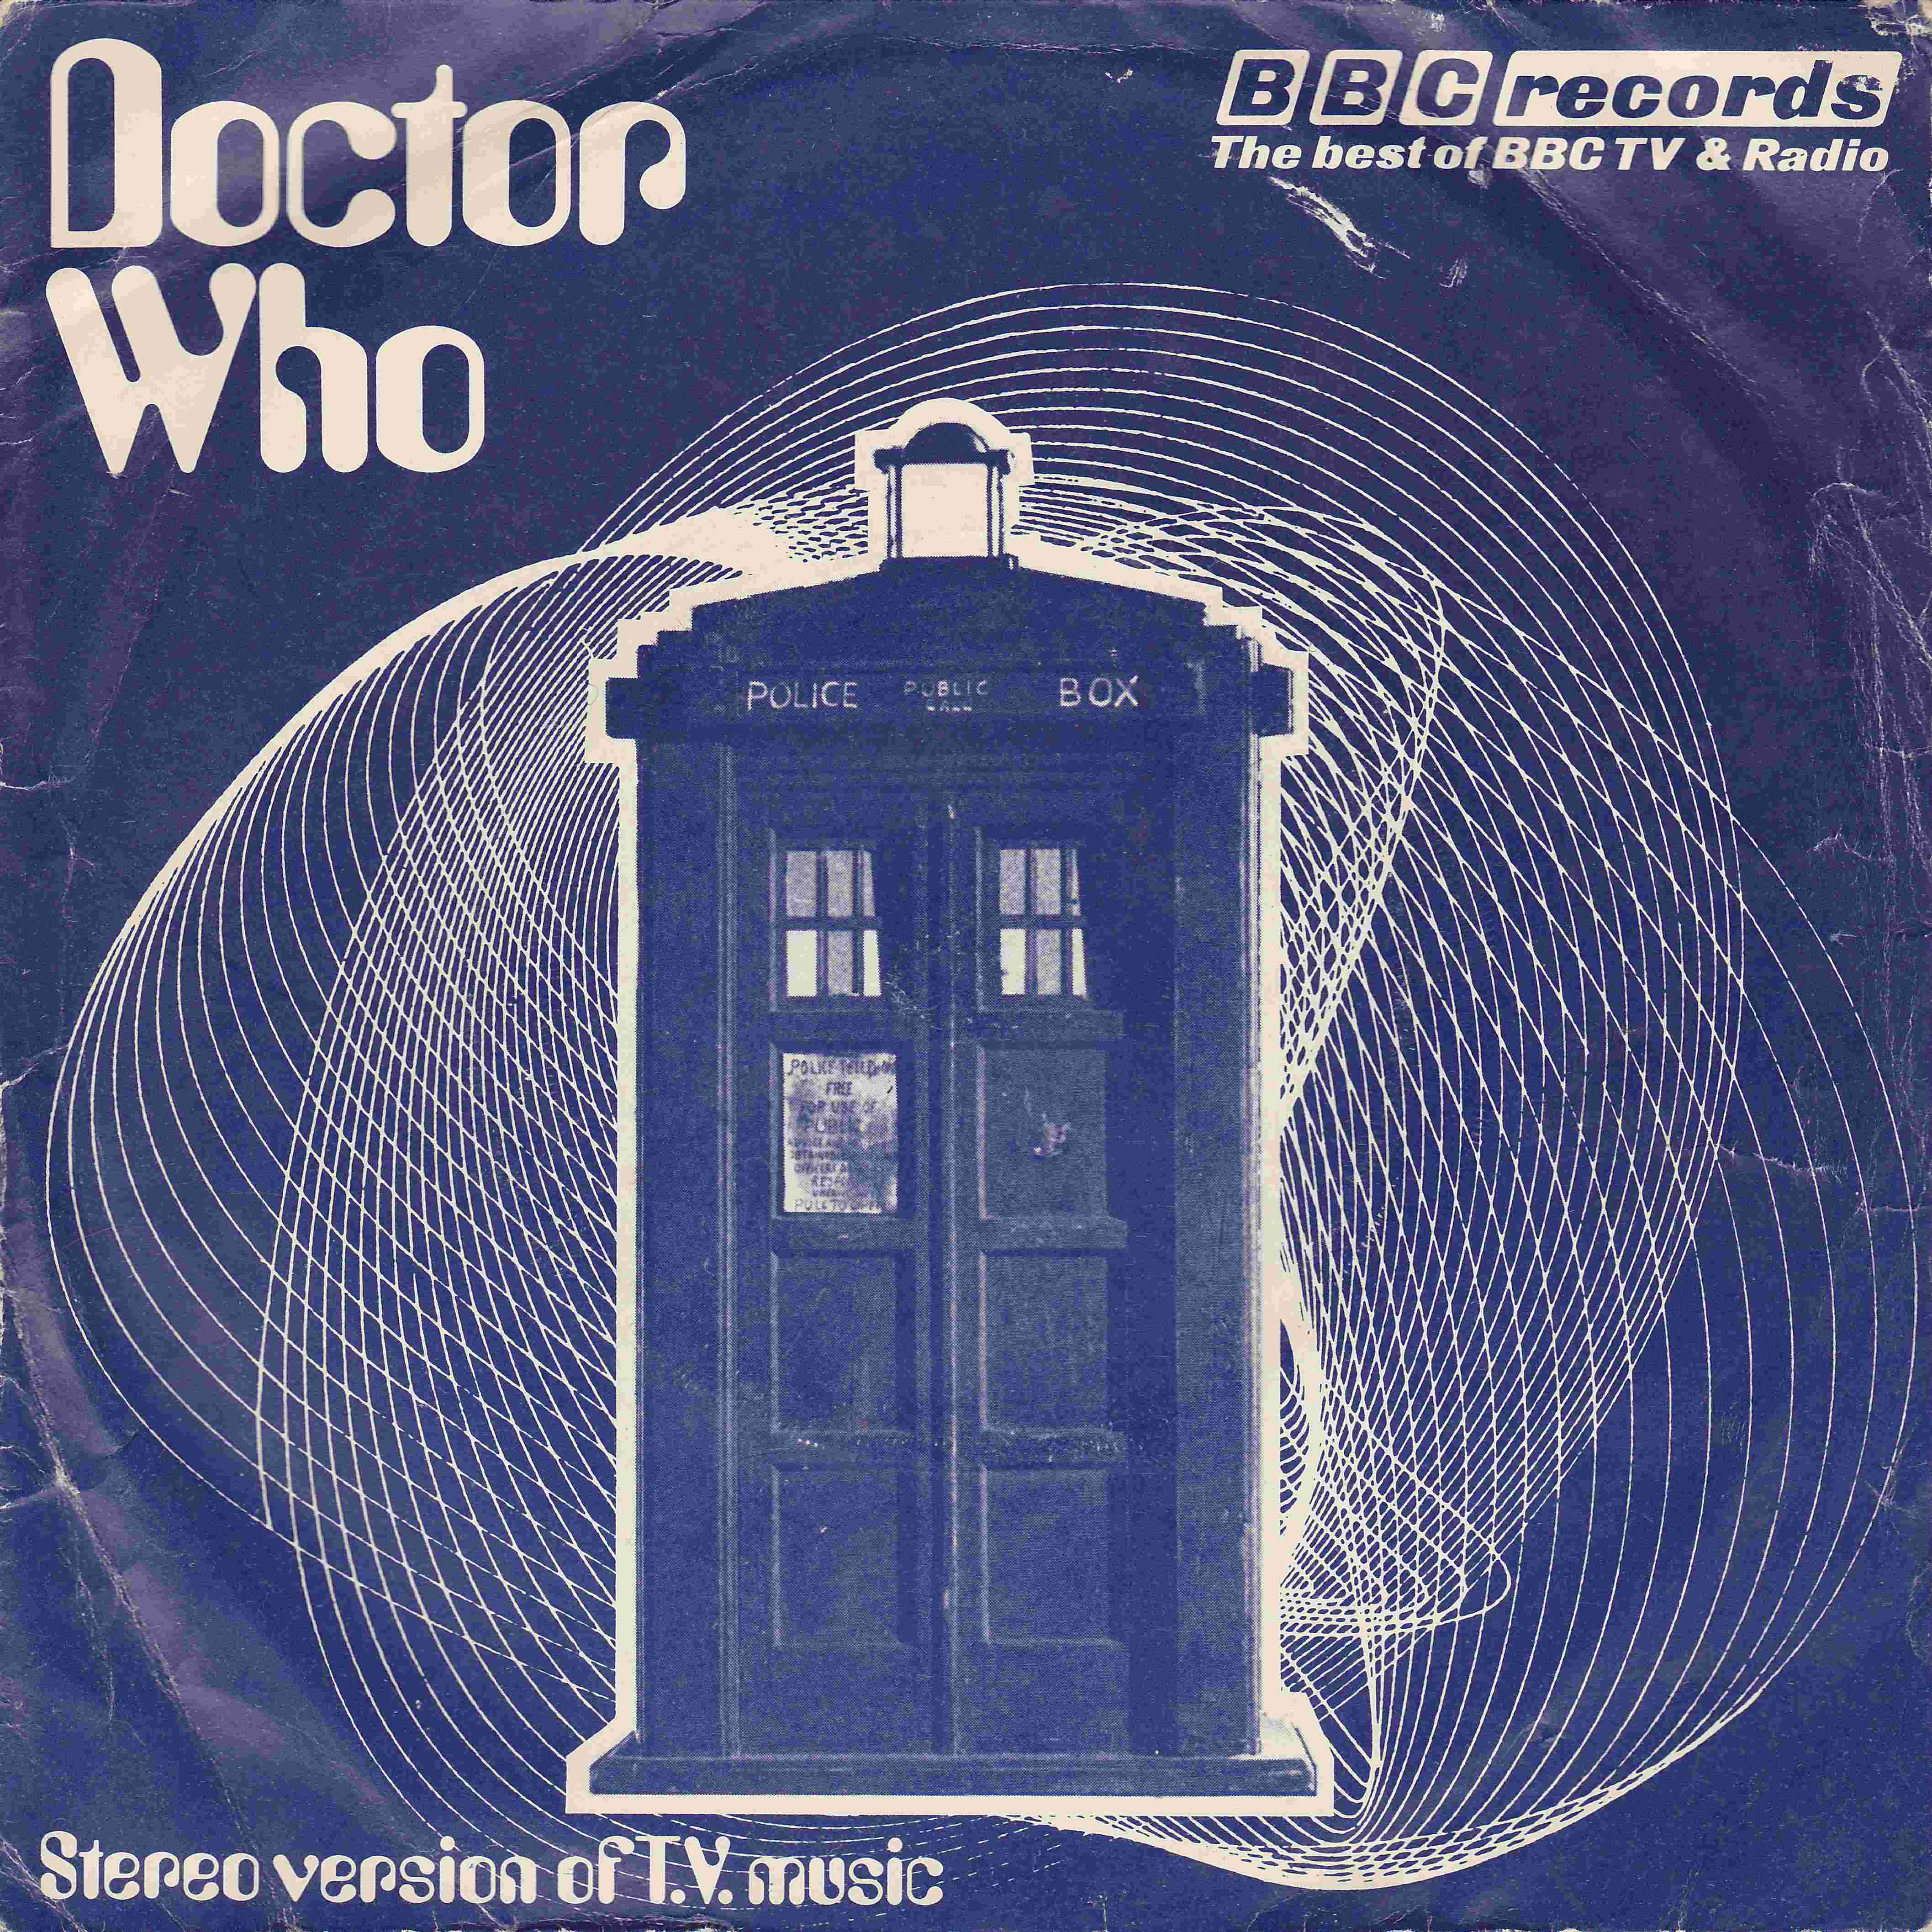 Picture of RESL 11 Doctor Who by artist Ron Grainer from the BBC singles - Records and Tapes library